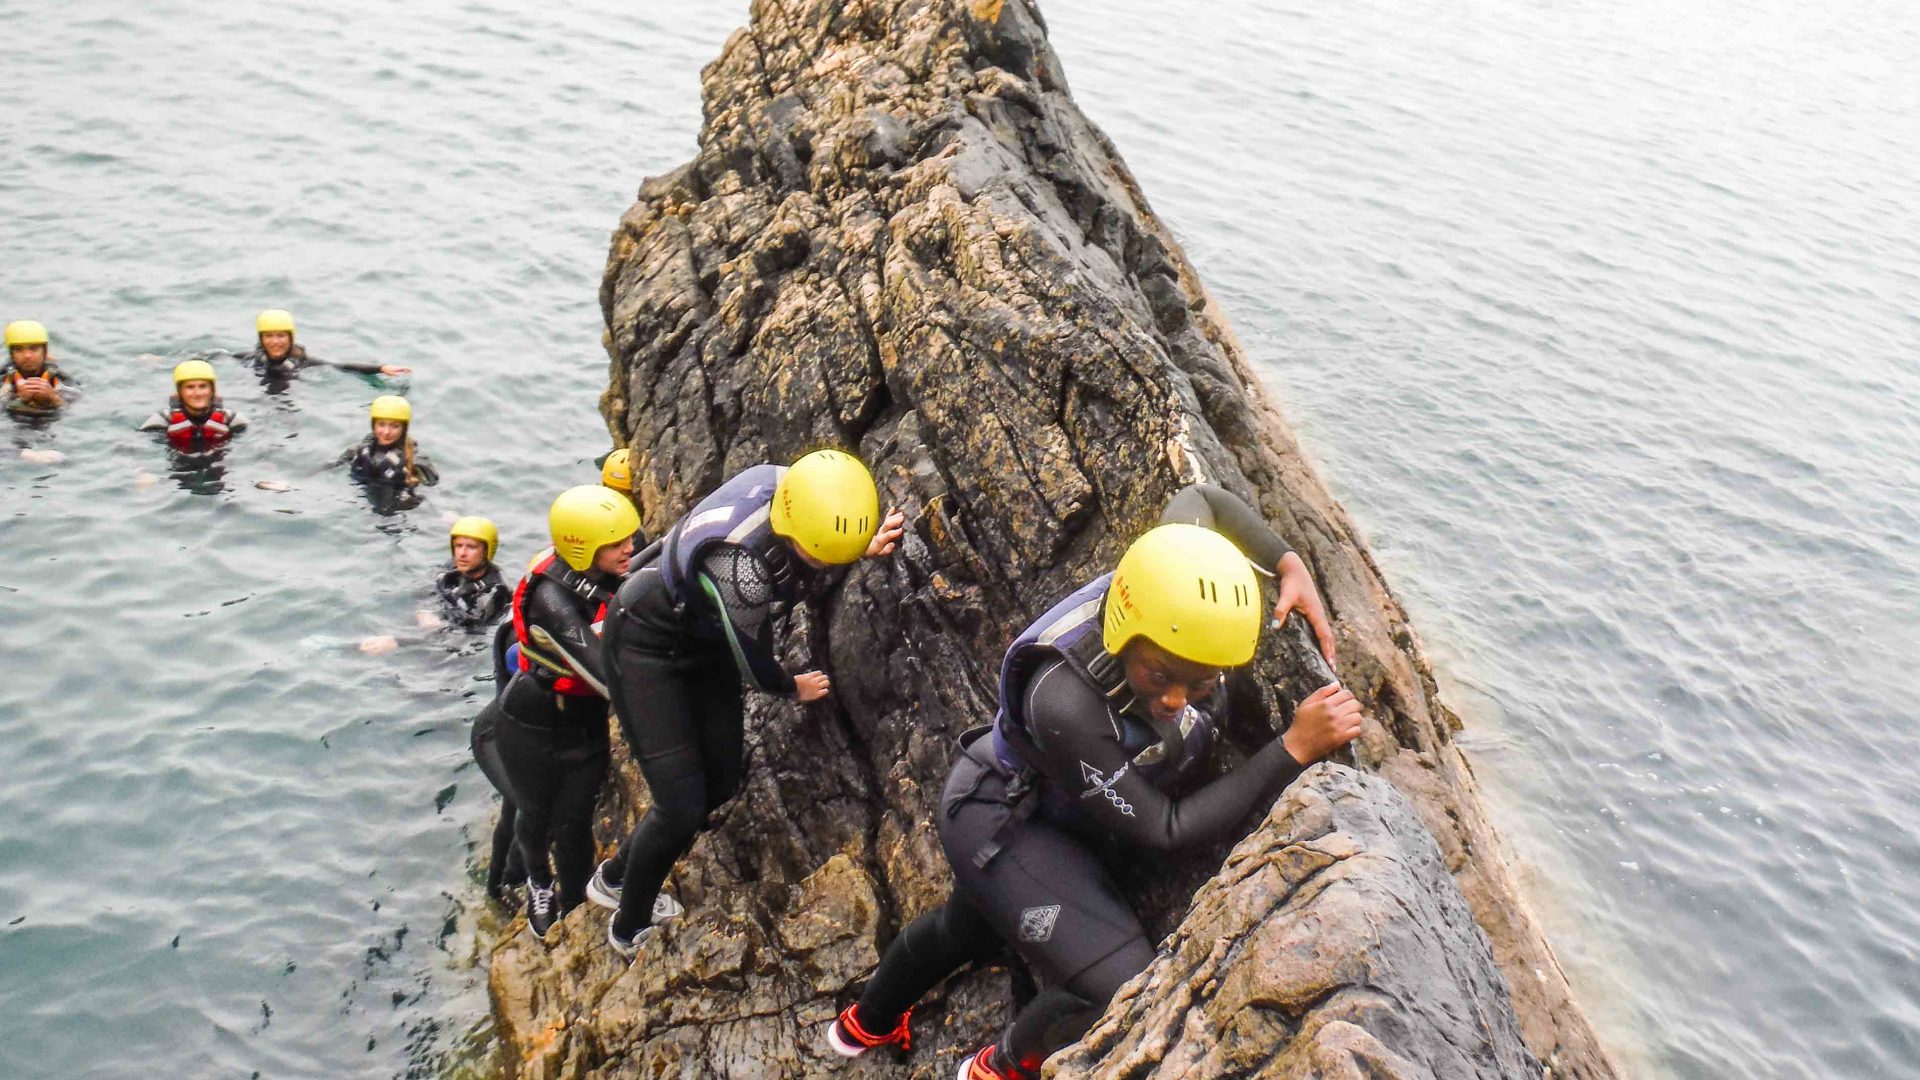 Clients make their way carefully up a rocky ledge on this coasteering adventure.